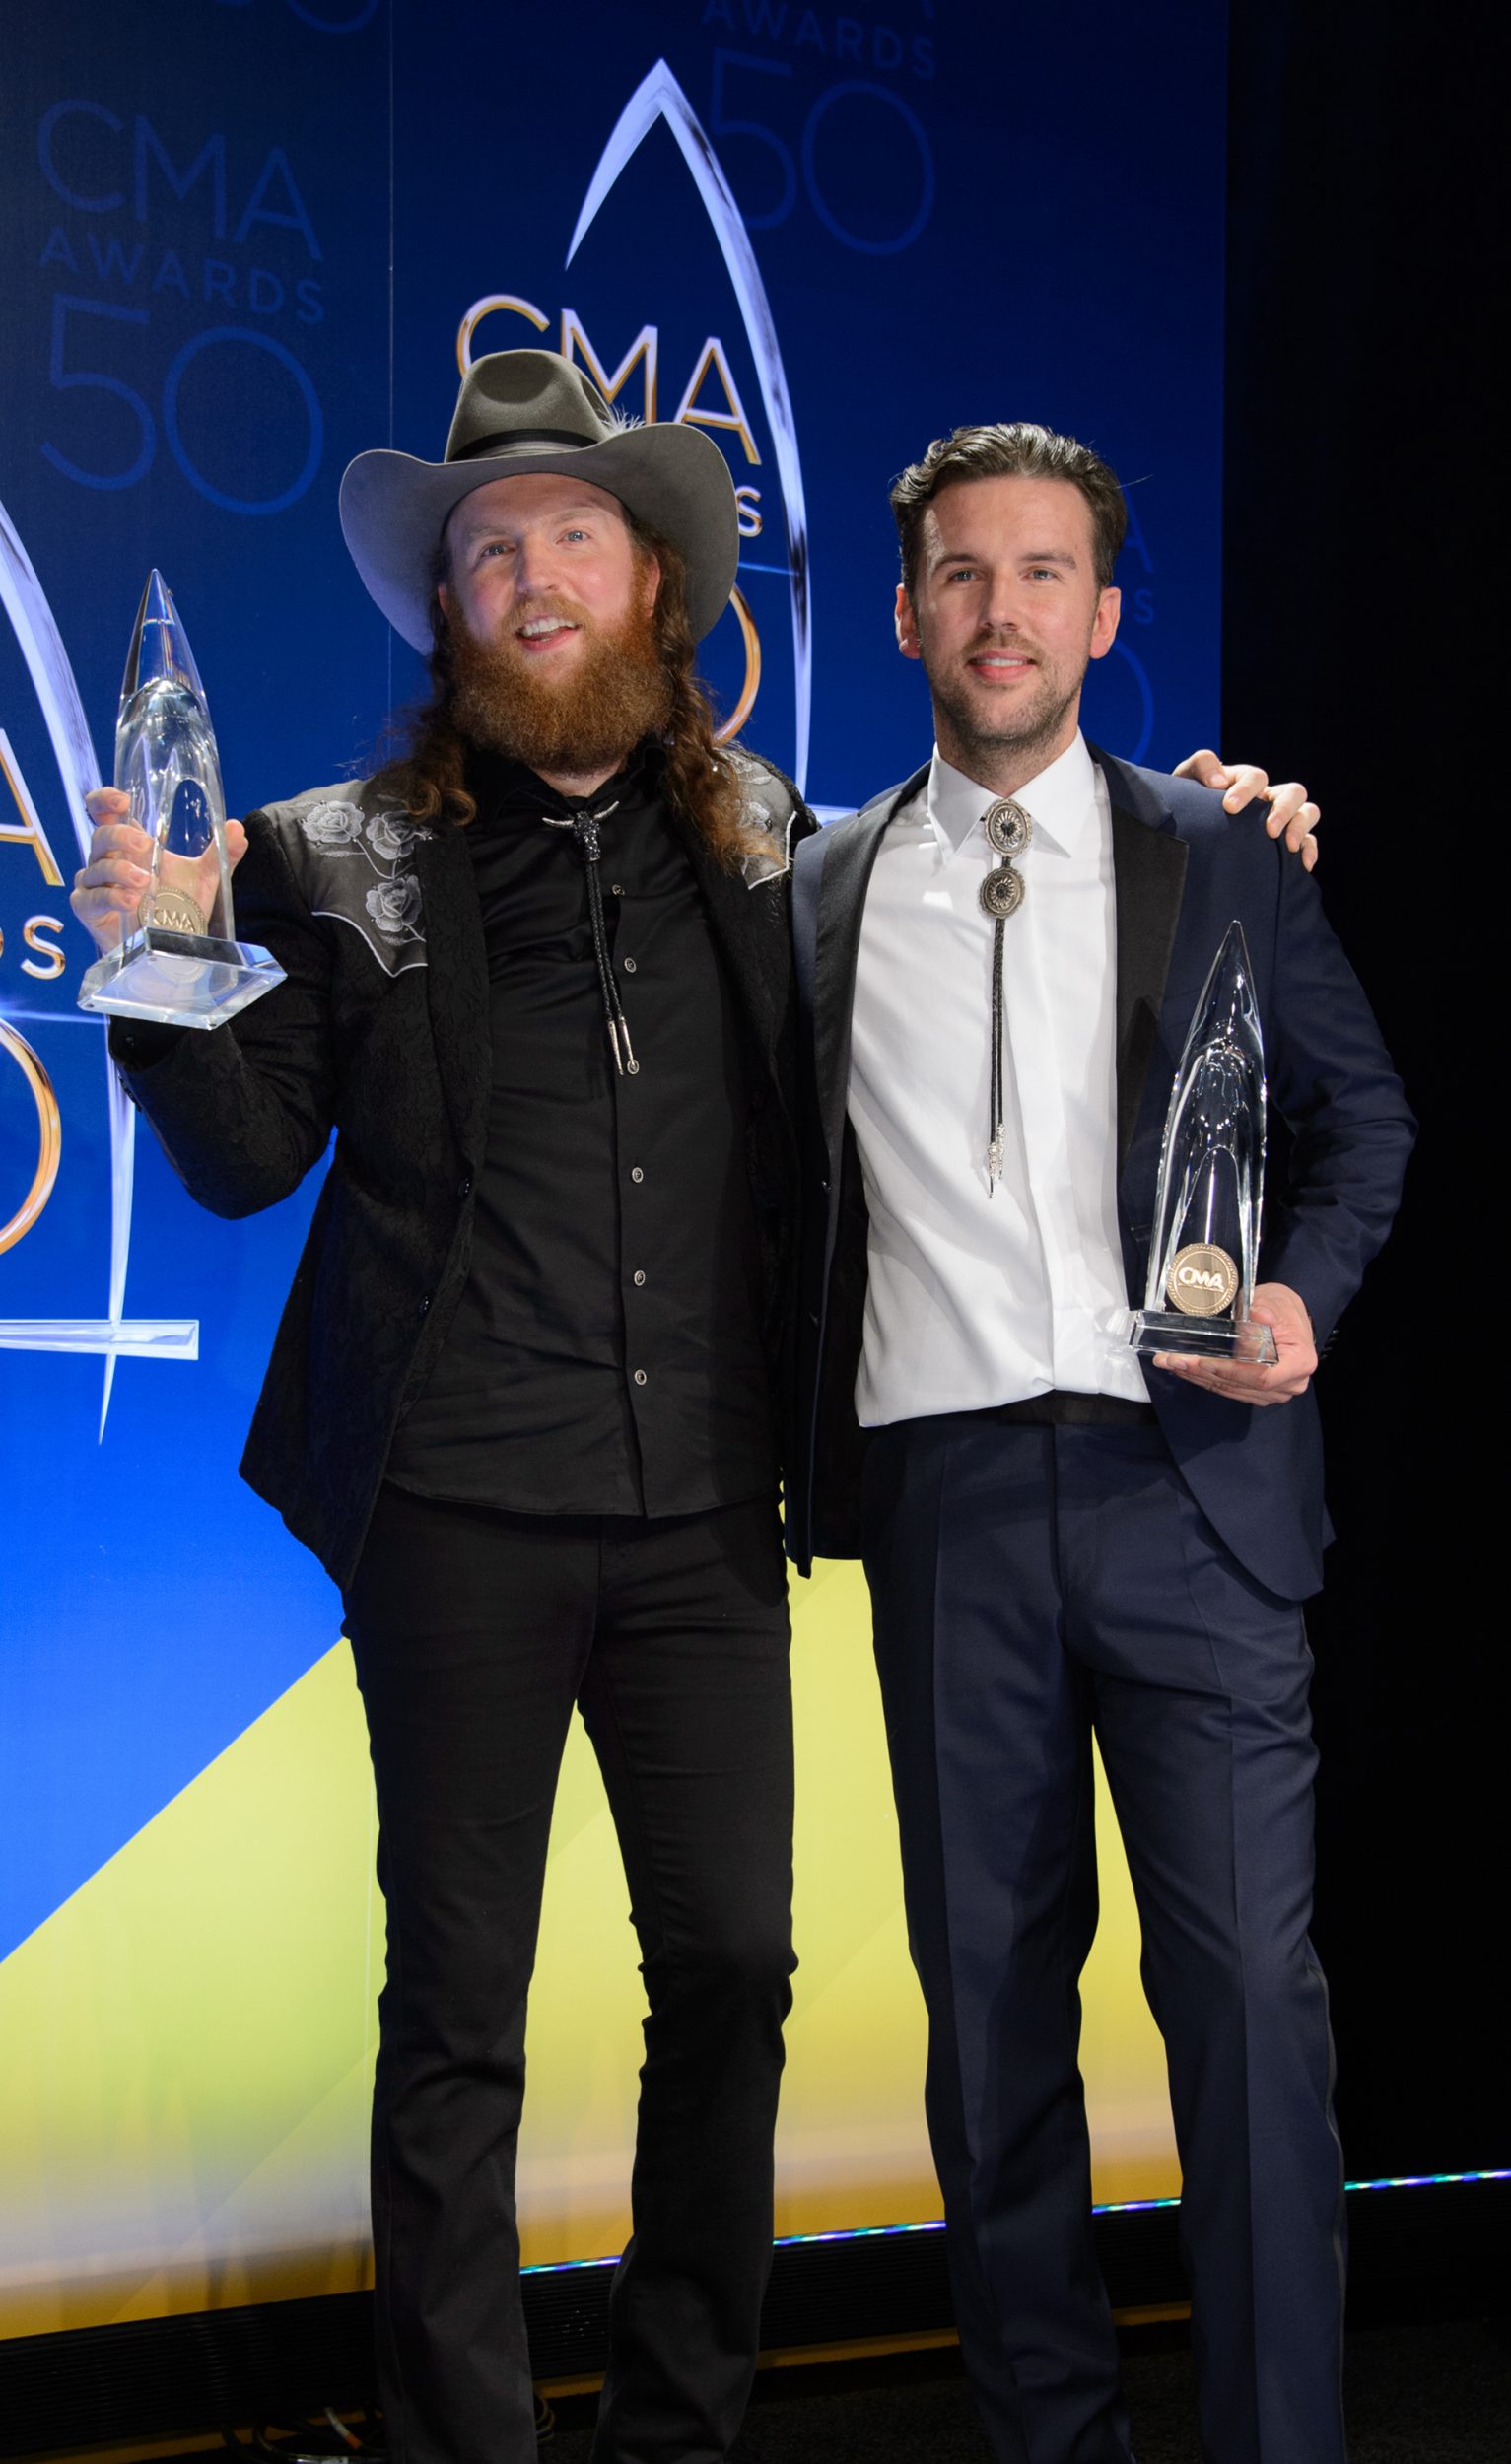 THE 50th ANNUAL CMA AWARDS - “The 50th Annual CMA Awards,” hosted by Brad Paisley and Carrie Underwood, broadcasts live from the Bridgestone Arena in Nashville, Wednesday, November 2 (8:00-11:00 p.m. EDT), on the ABC Television Network. (ABC/Brett Oronzio) BROTHERS OSBORNE